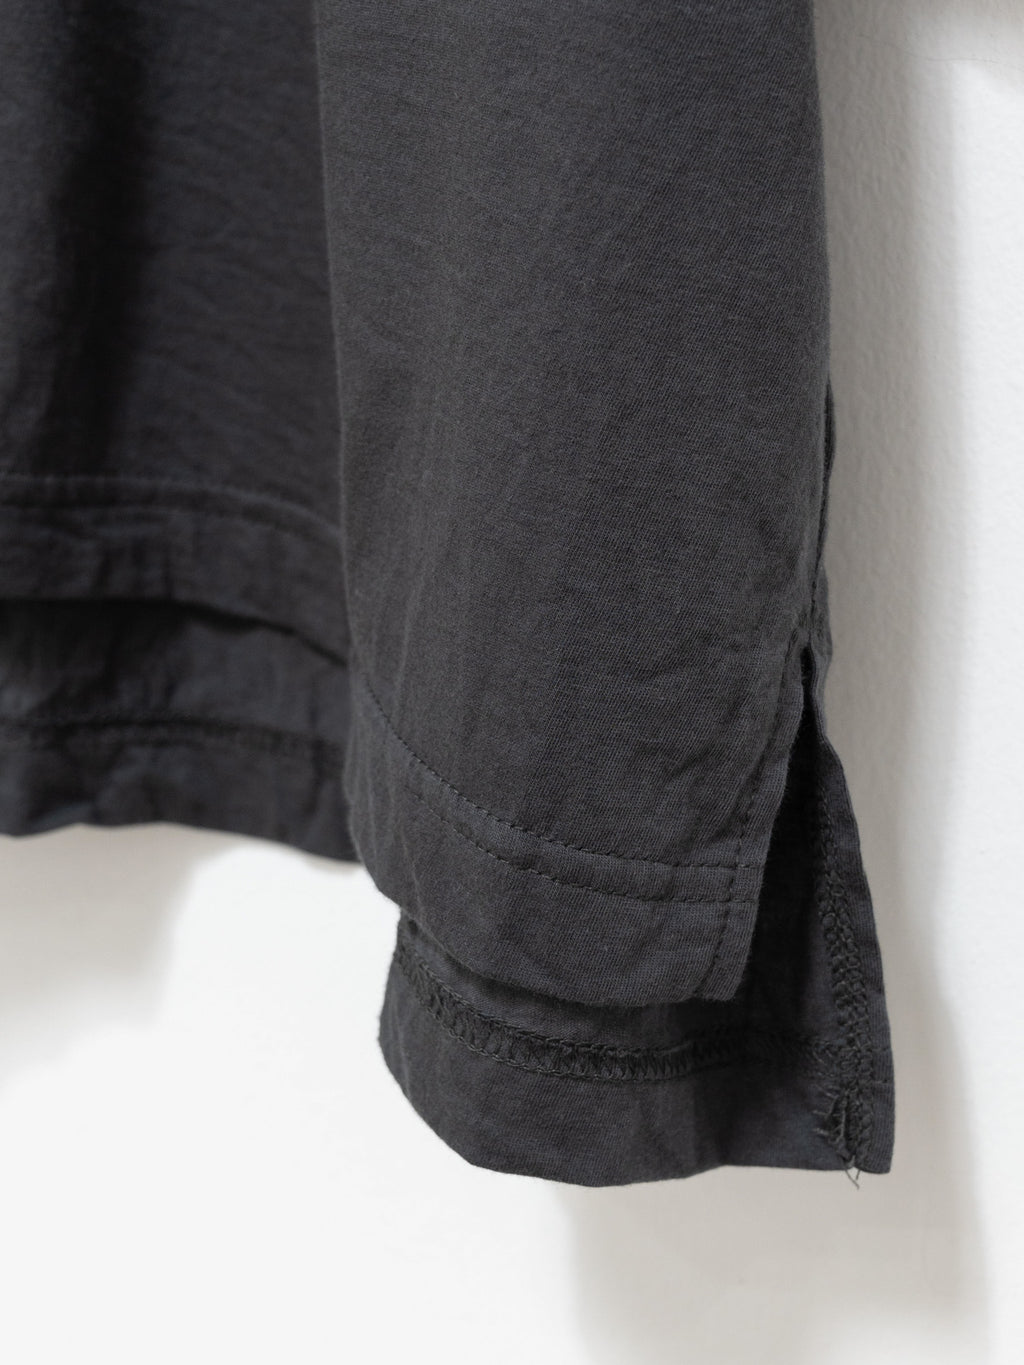 Namu Shop - ICHI Relaxed S/S Pullover - Charcoal Gray